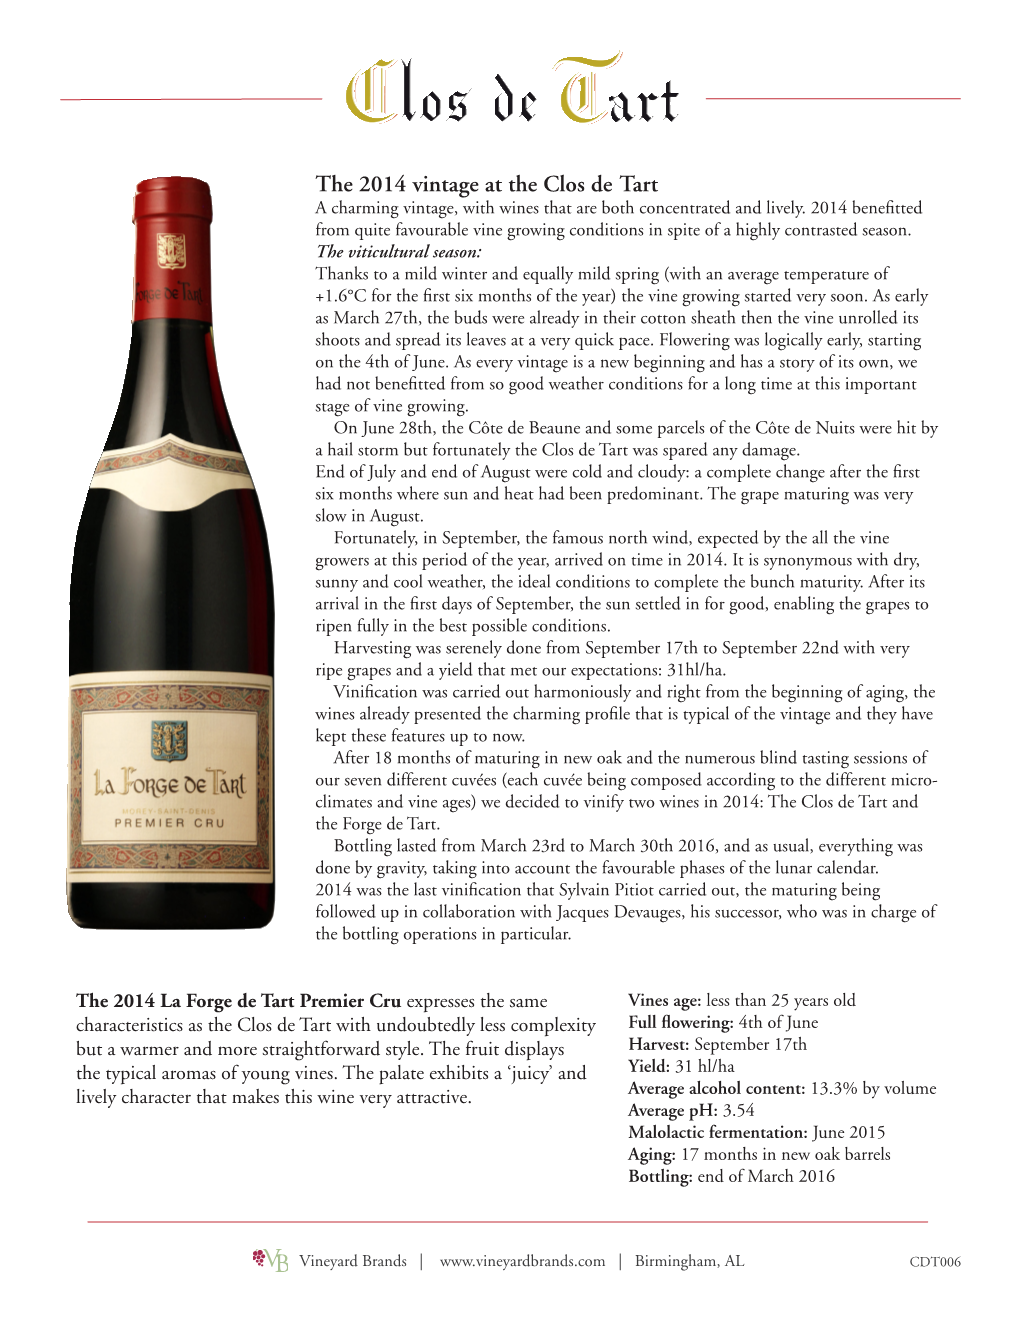 The 2014 Vintage at the Clos De Tart a Charming Vintage, with Wines That Are Both Concentrated and Lively